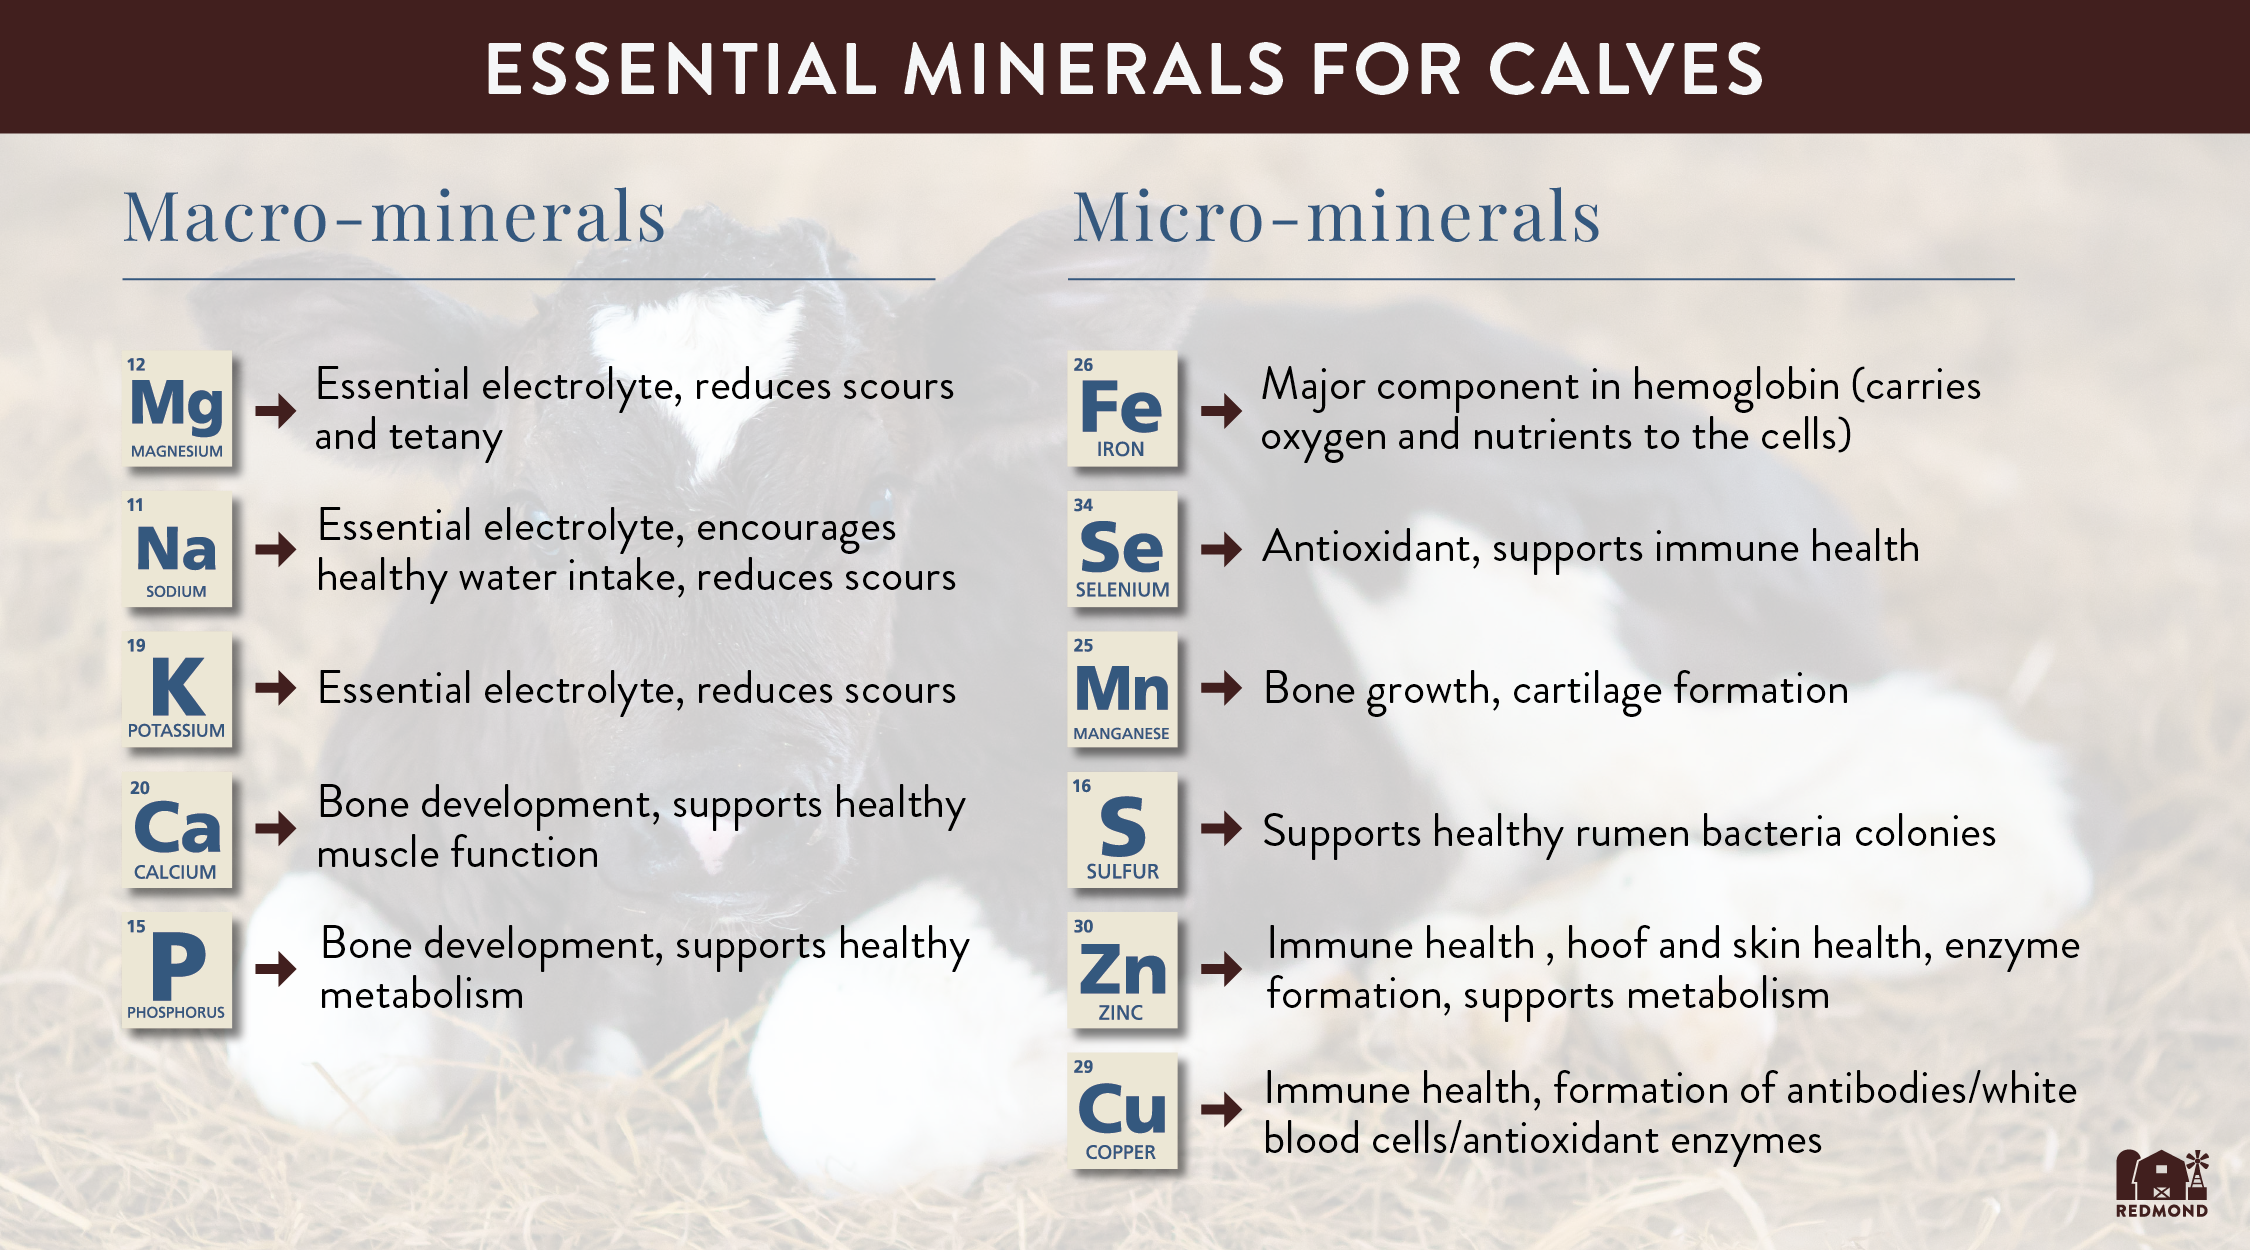 What minerals do calves need